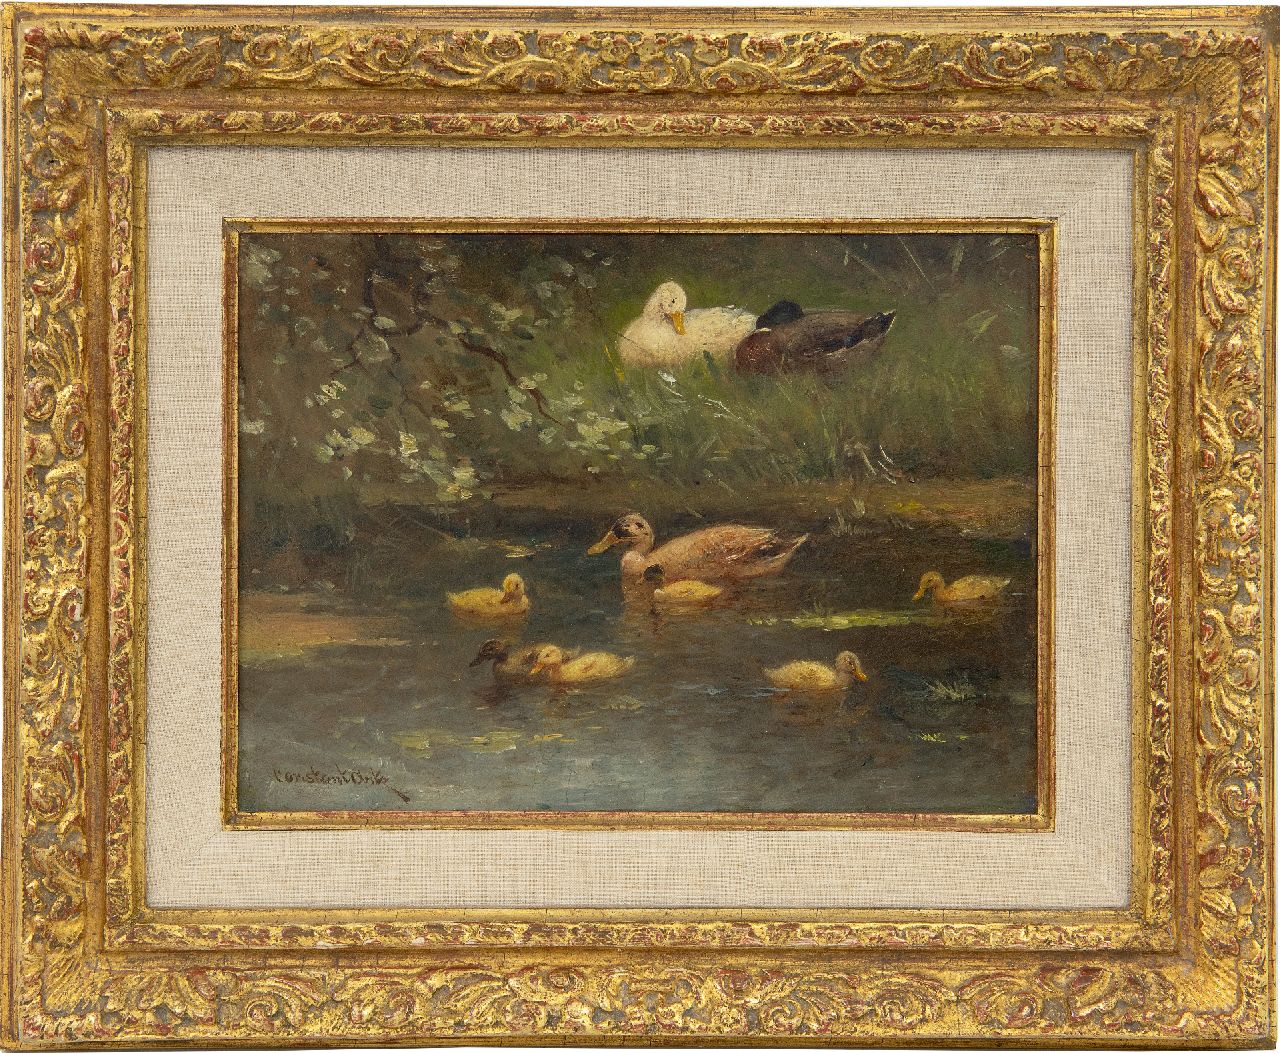 Artz C.D.L.  | 'Constant' David Ludovic Artz | Paintings offered for sale | Duck with six ducklings, oil on panel 18.0 x 24.0 cm, signed l.l.